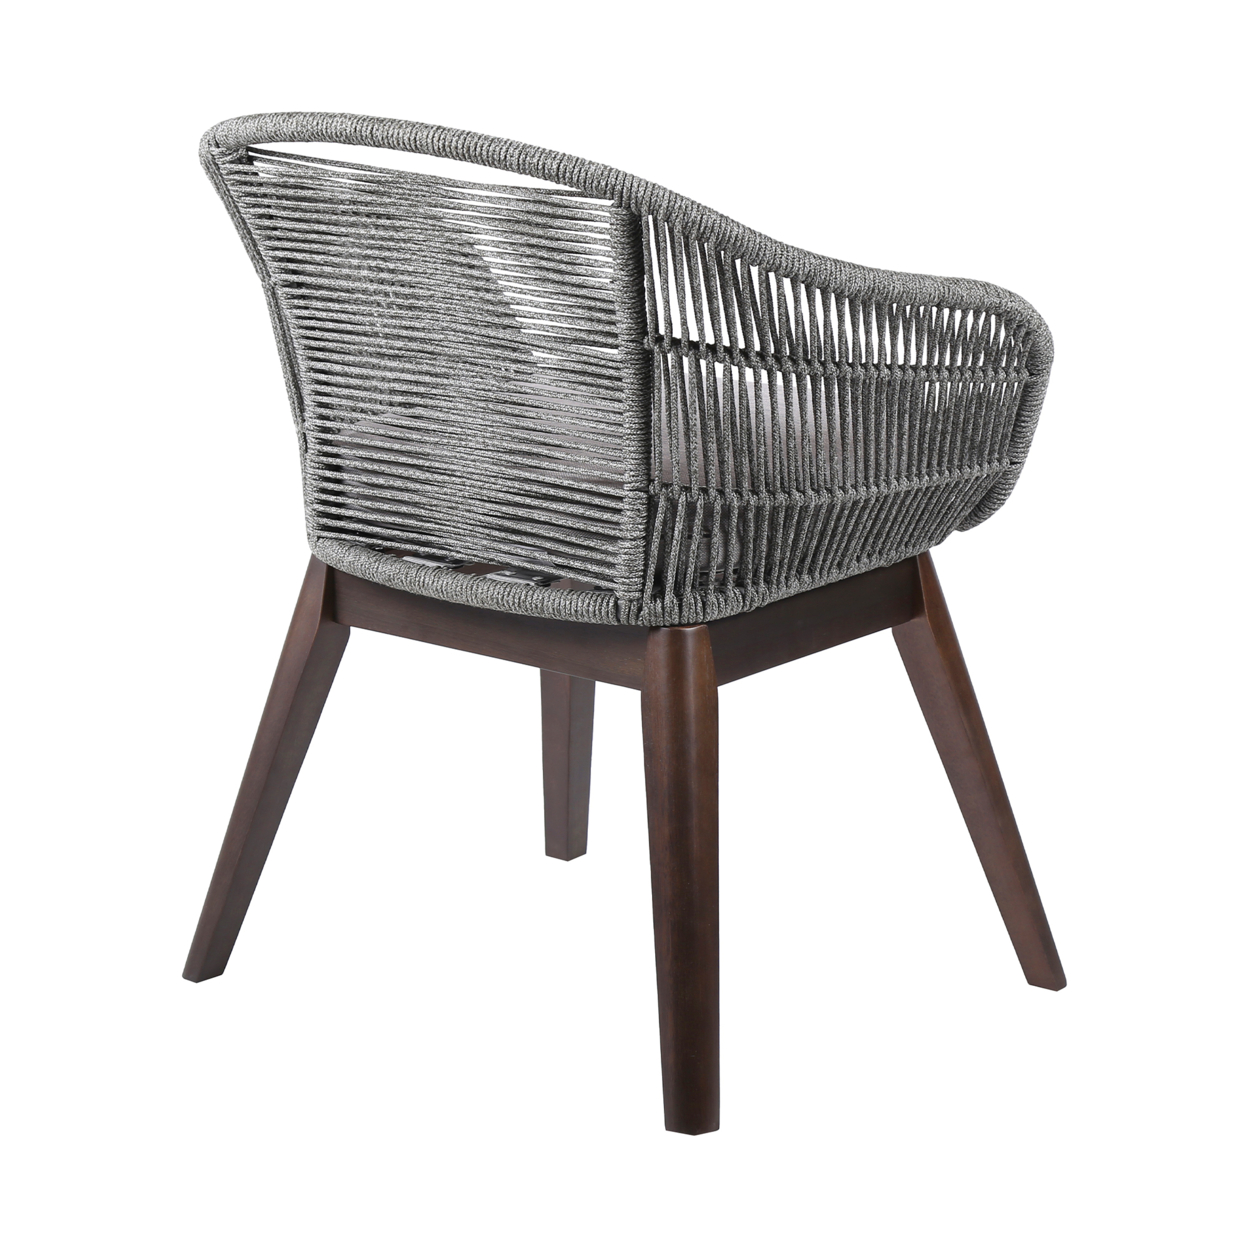 Indoor Outdoor Dining Chair With Fishbone Woven Curved Back, Gray- Saltoro Sherpi